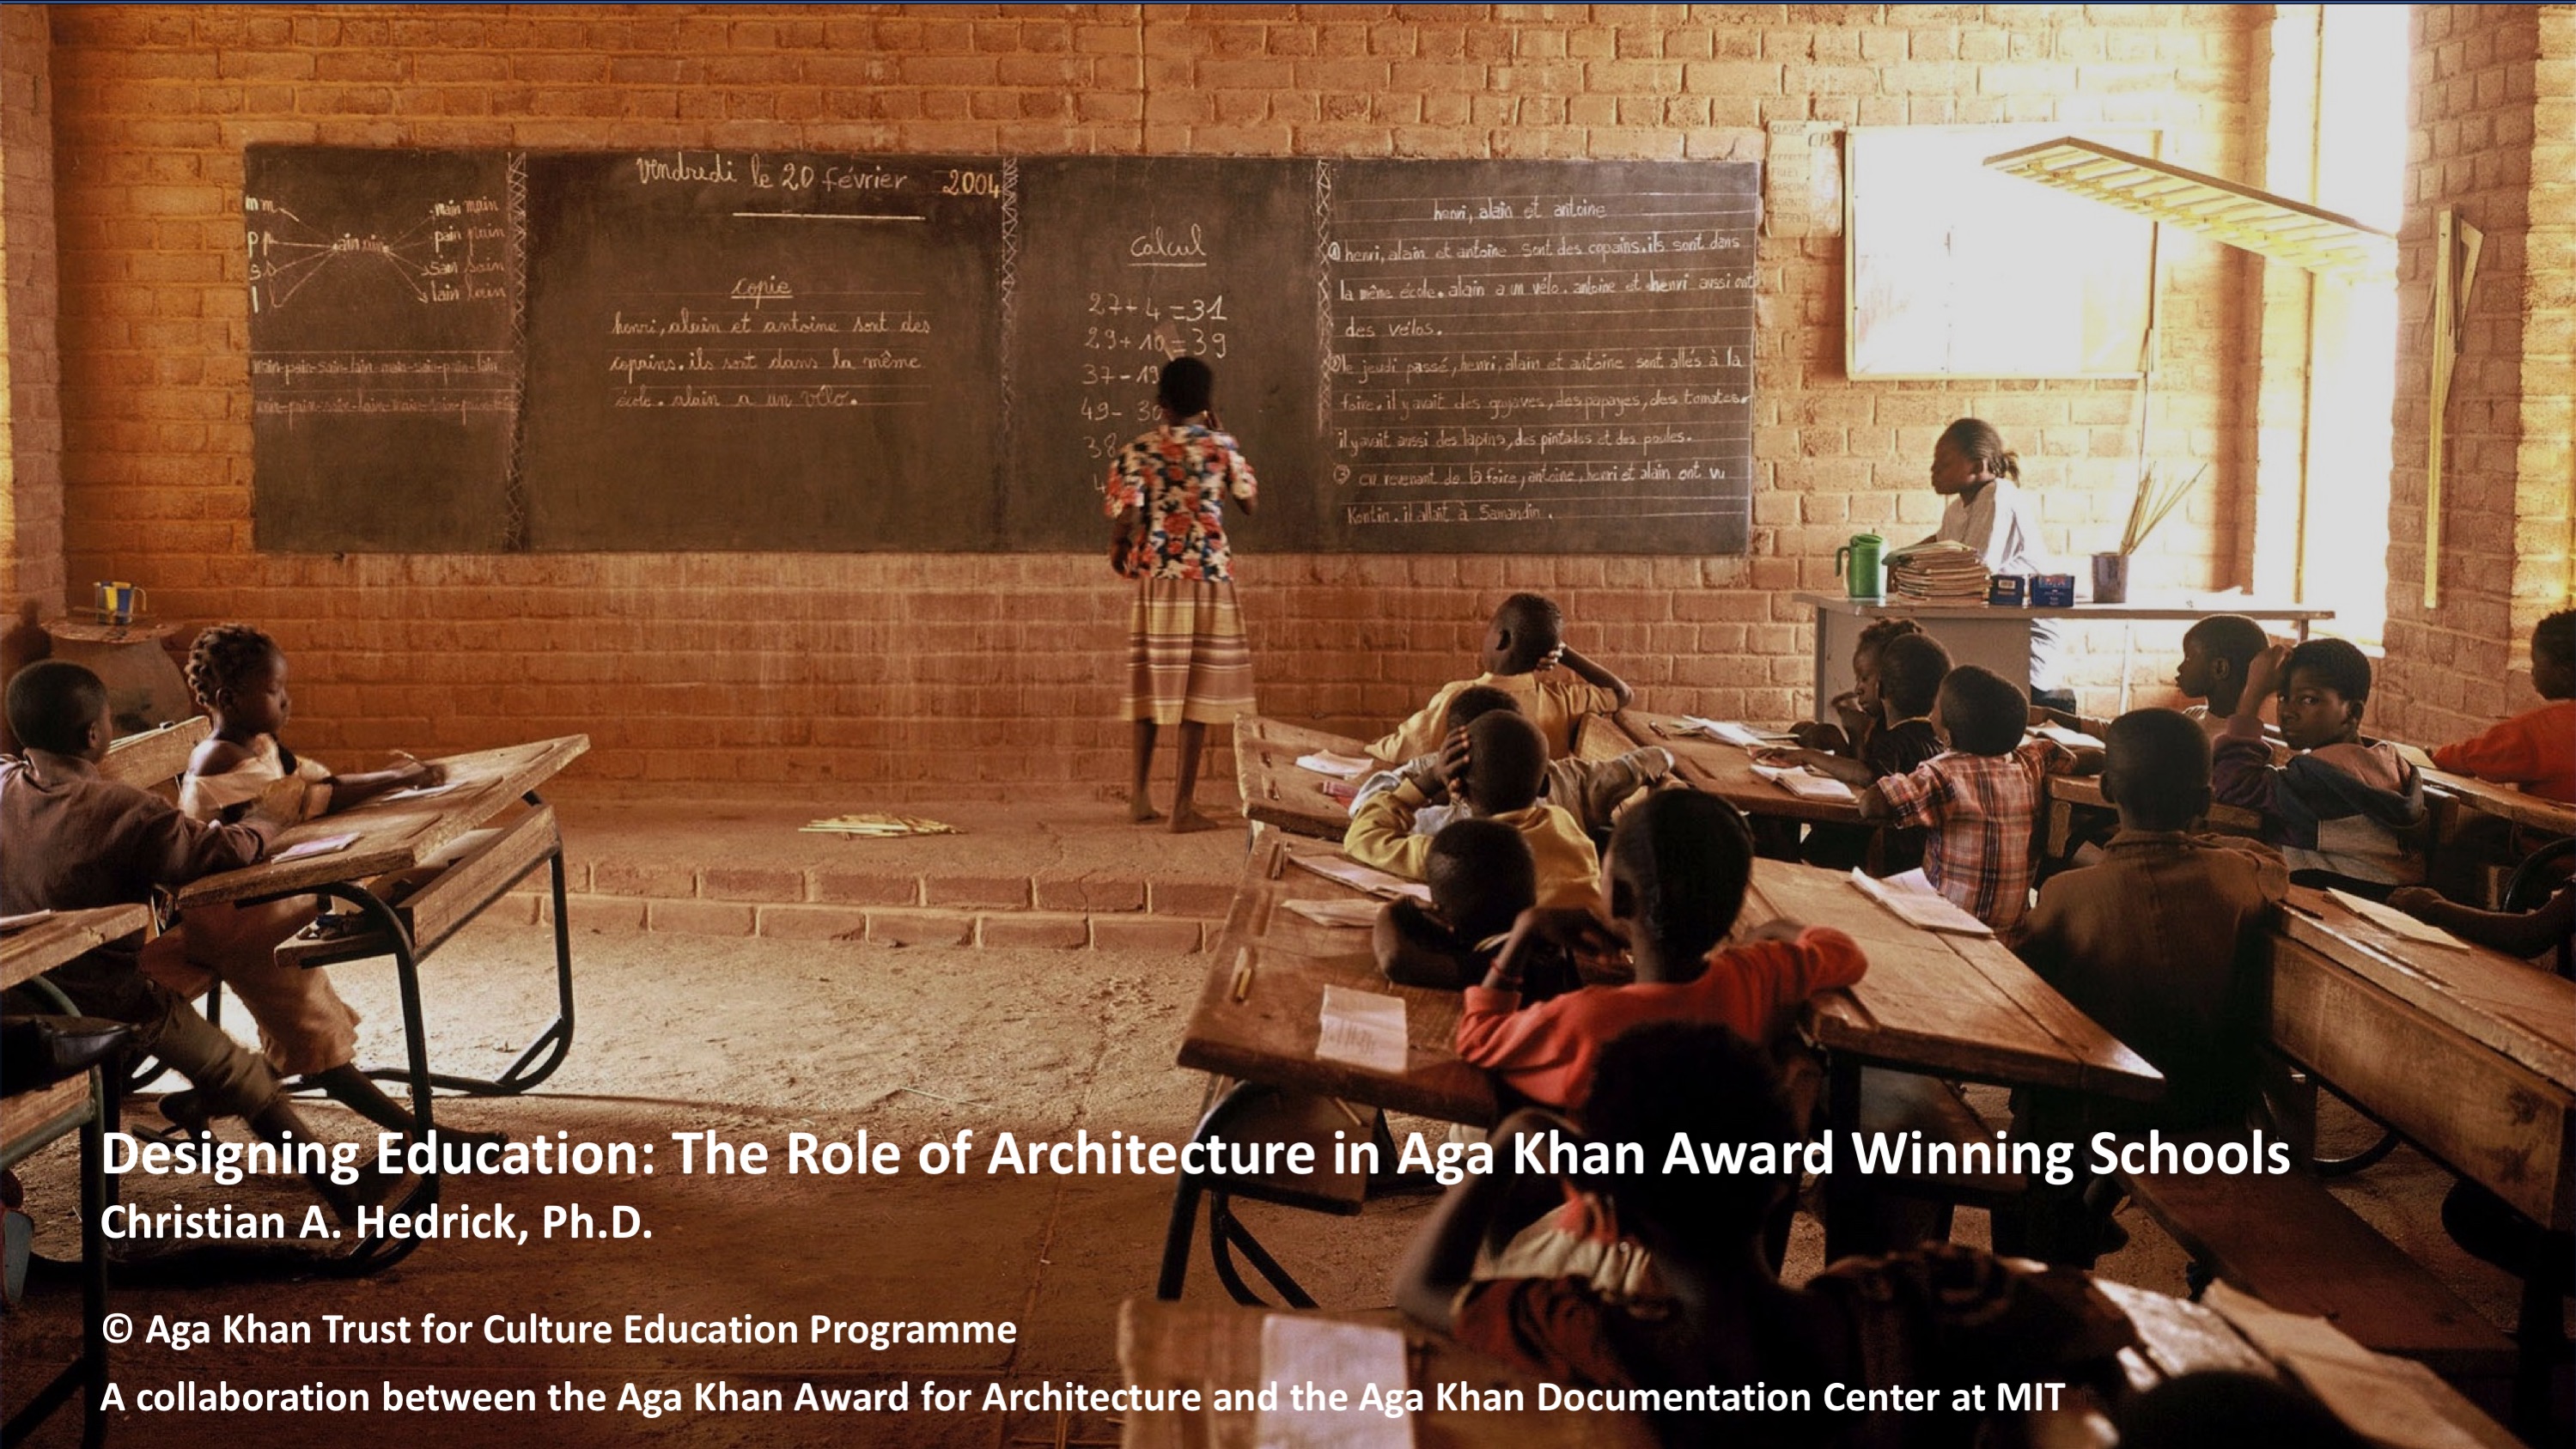 Designing Education: The Role of Architecture in Aga Khan Award Winning Schools